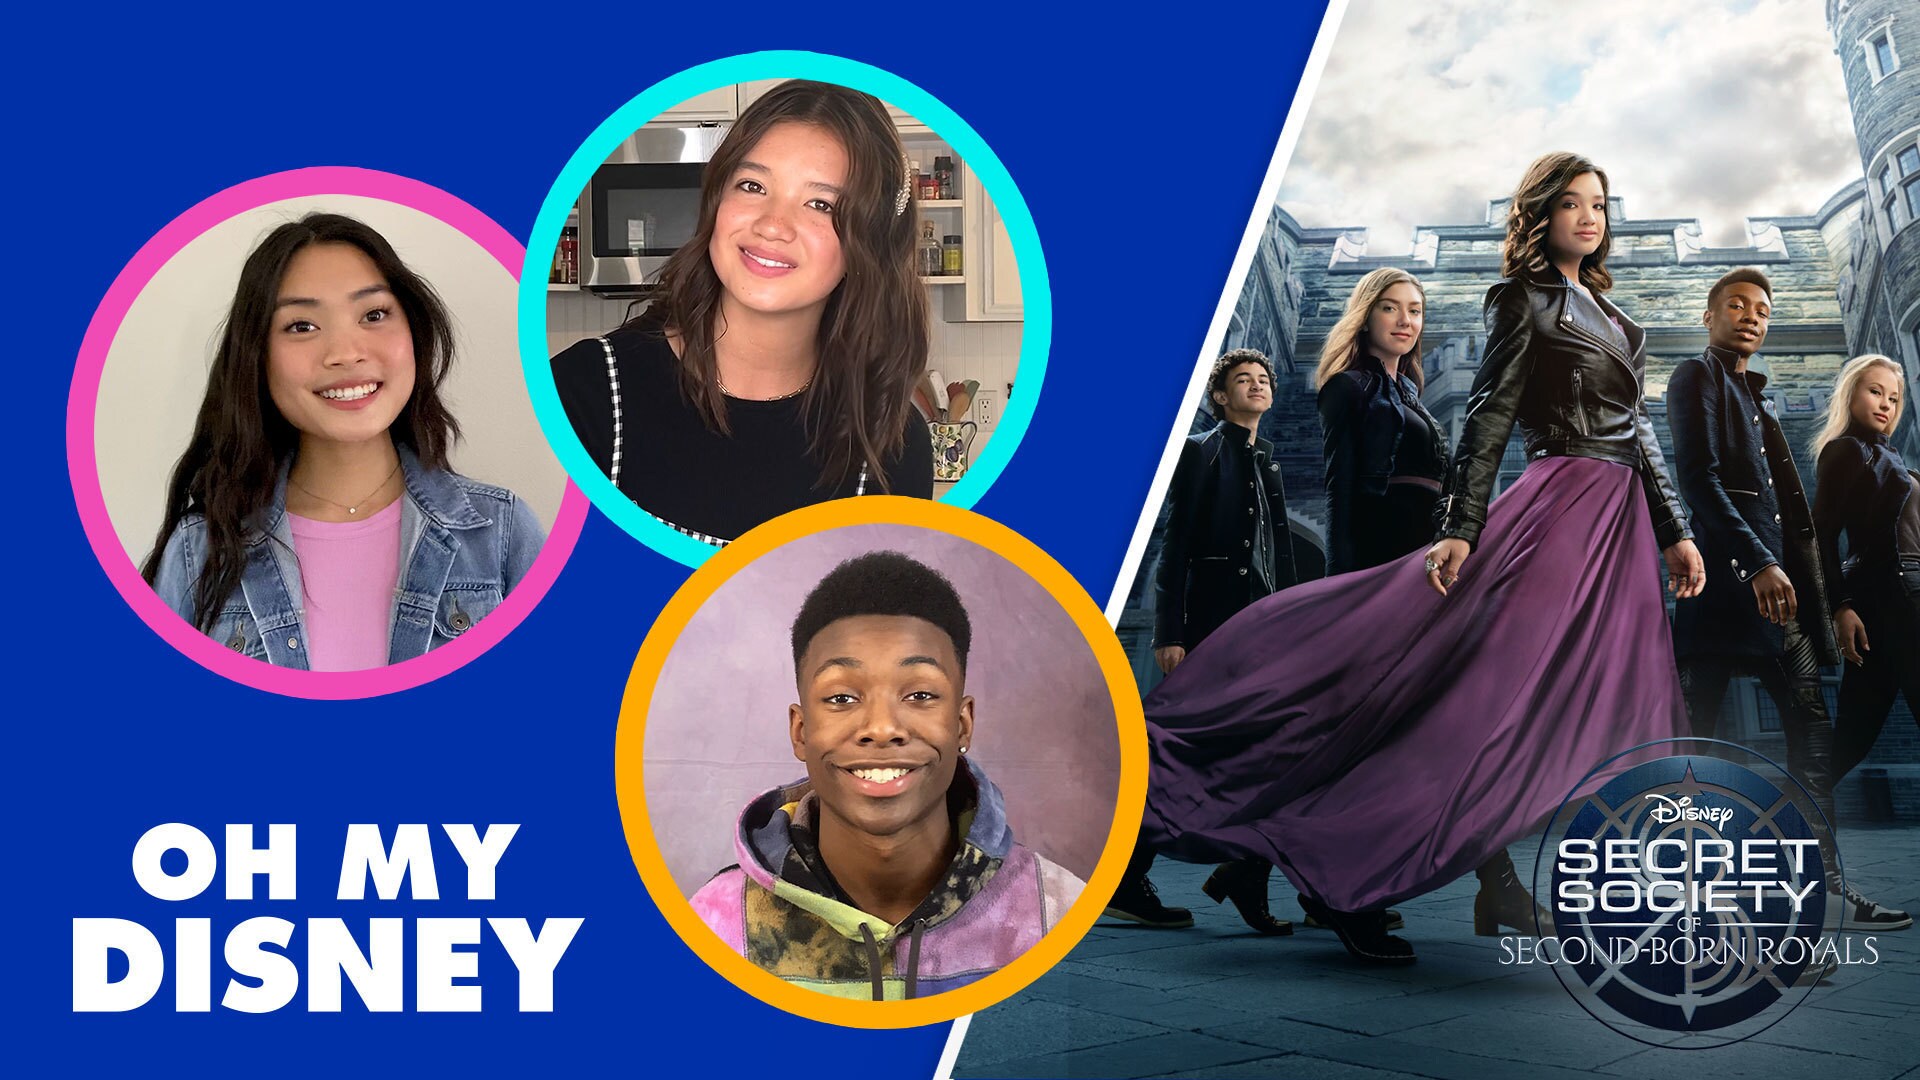 The Cast of Secret Society of Second-Born Royals Shares Their Hidden Talents | Oh My Disney